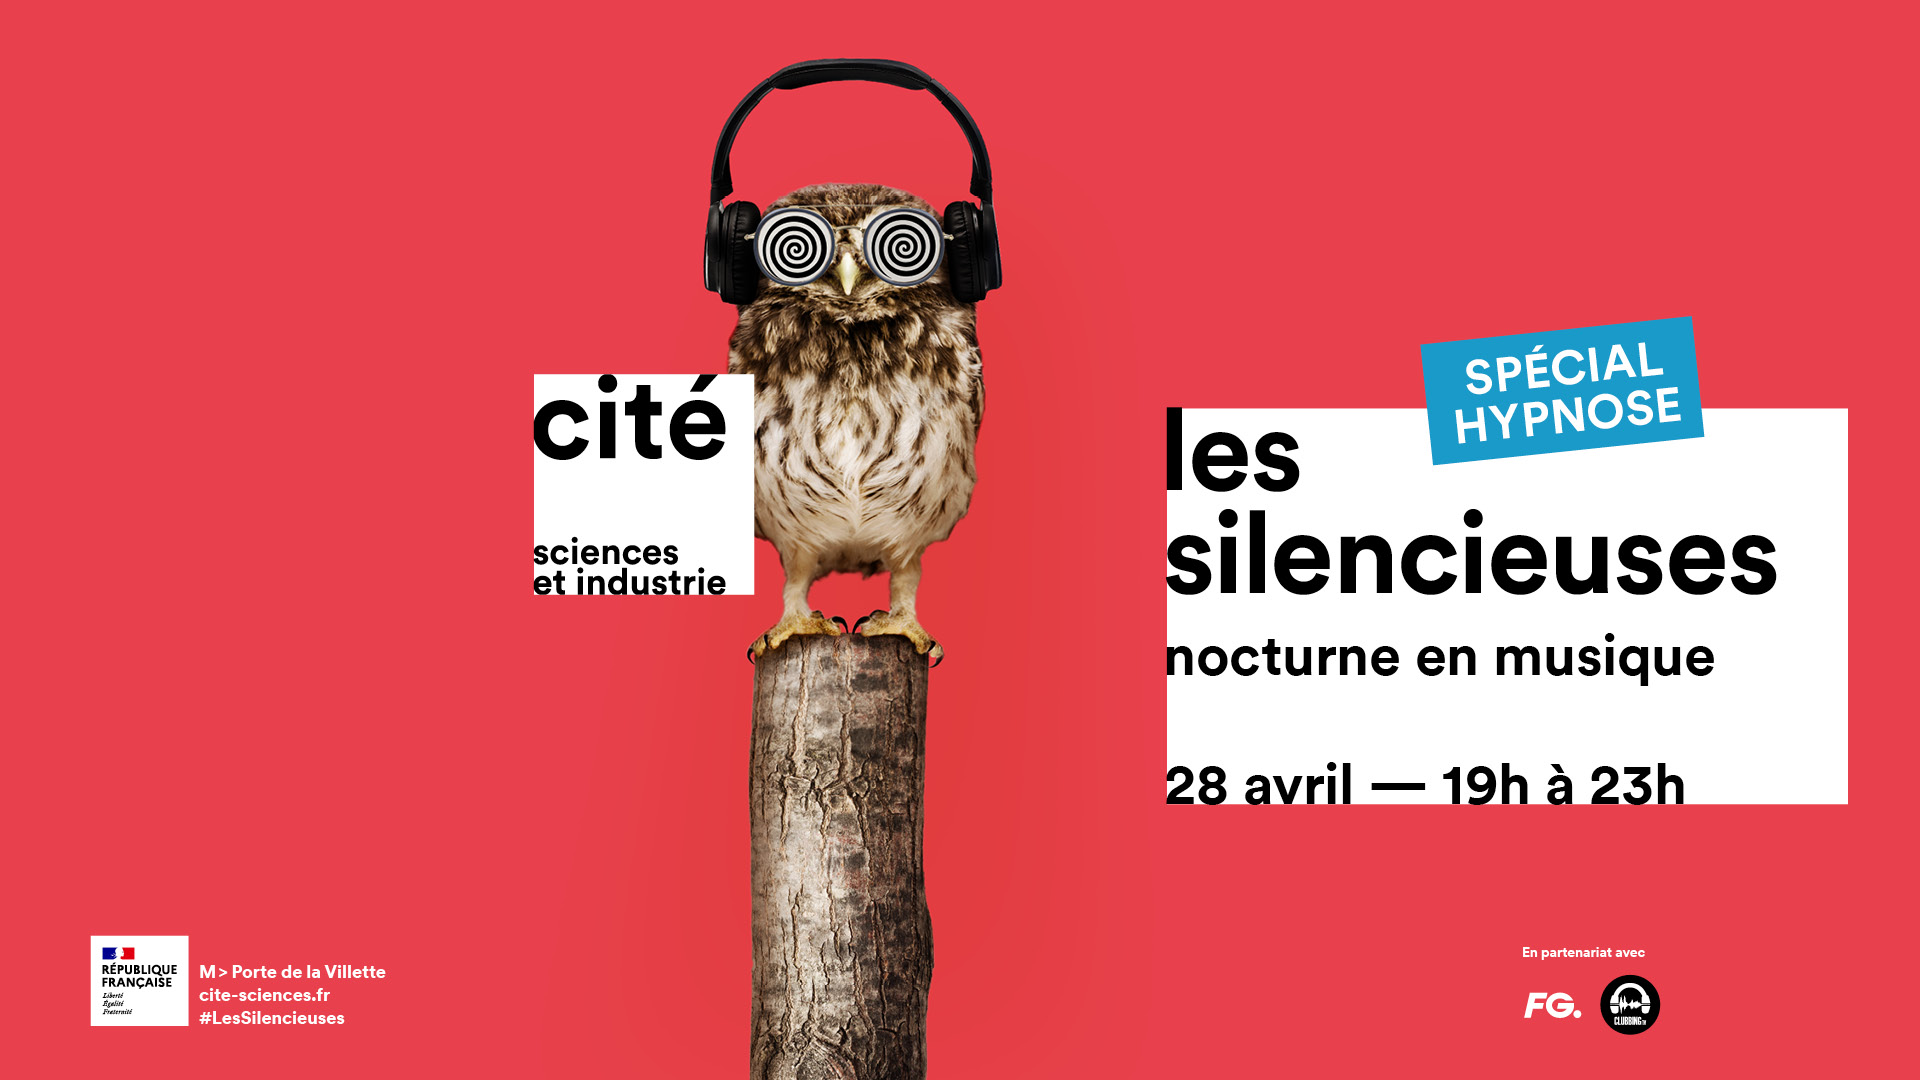 WIN your tickets for Les Silencieuses at Paris City of Science and Industry.